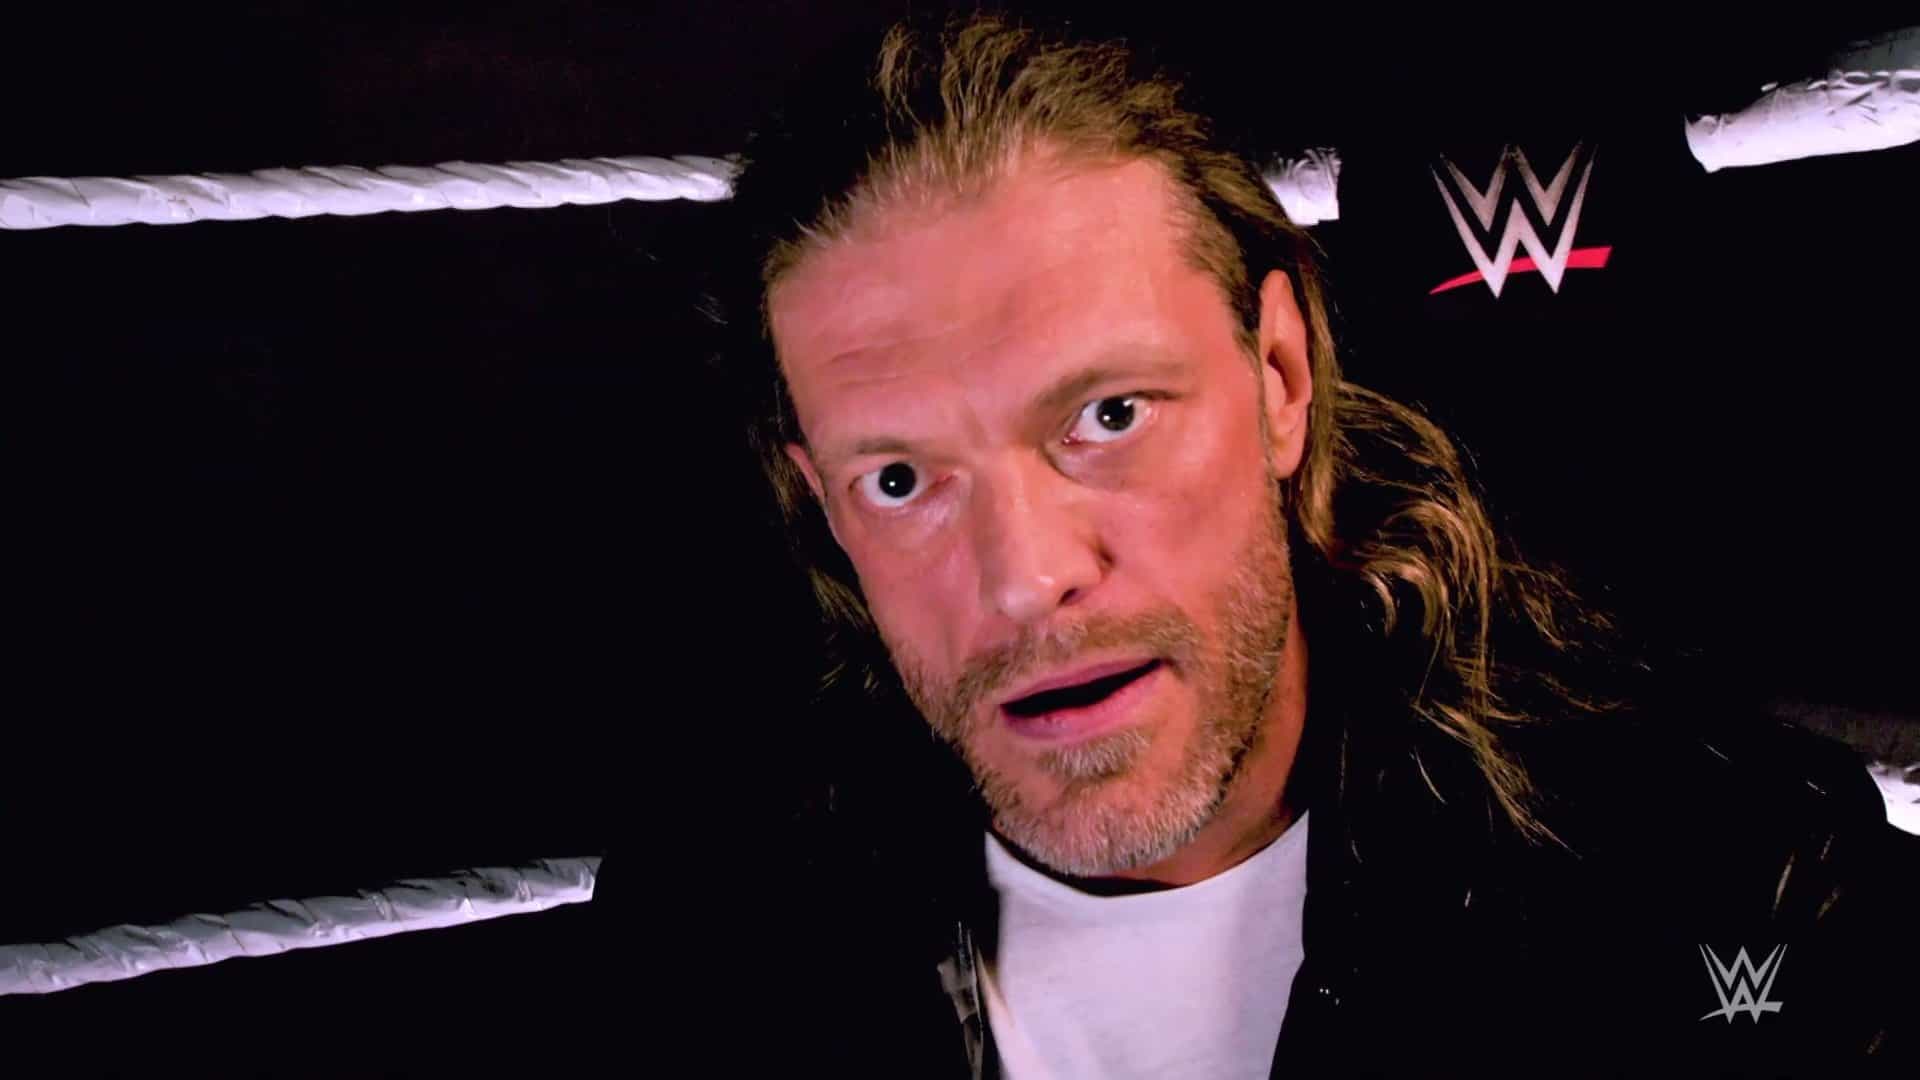 Edge Returns to WWE at the Royal Rumble this weekend